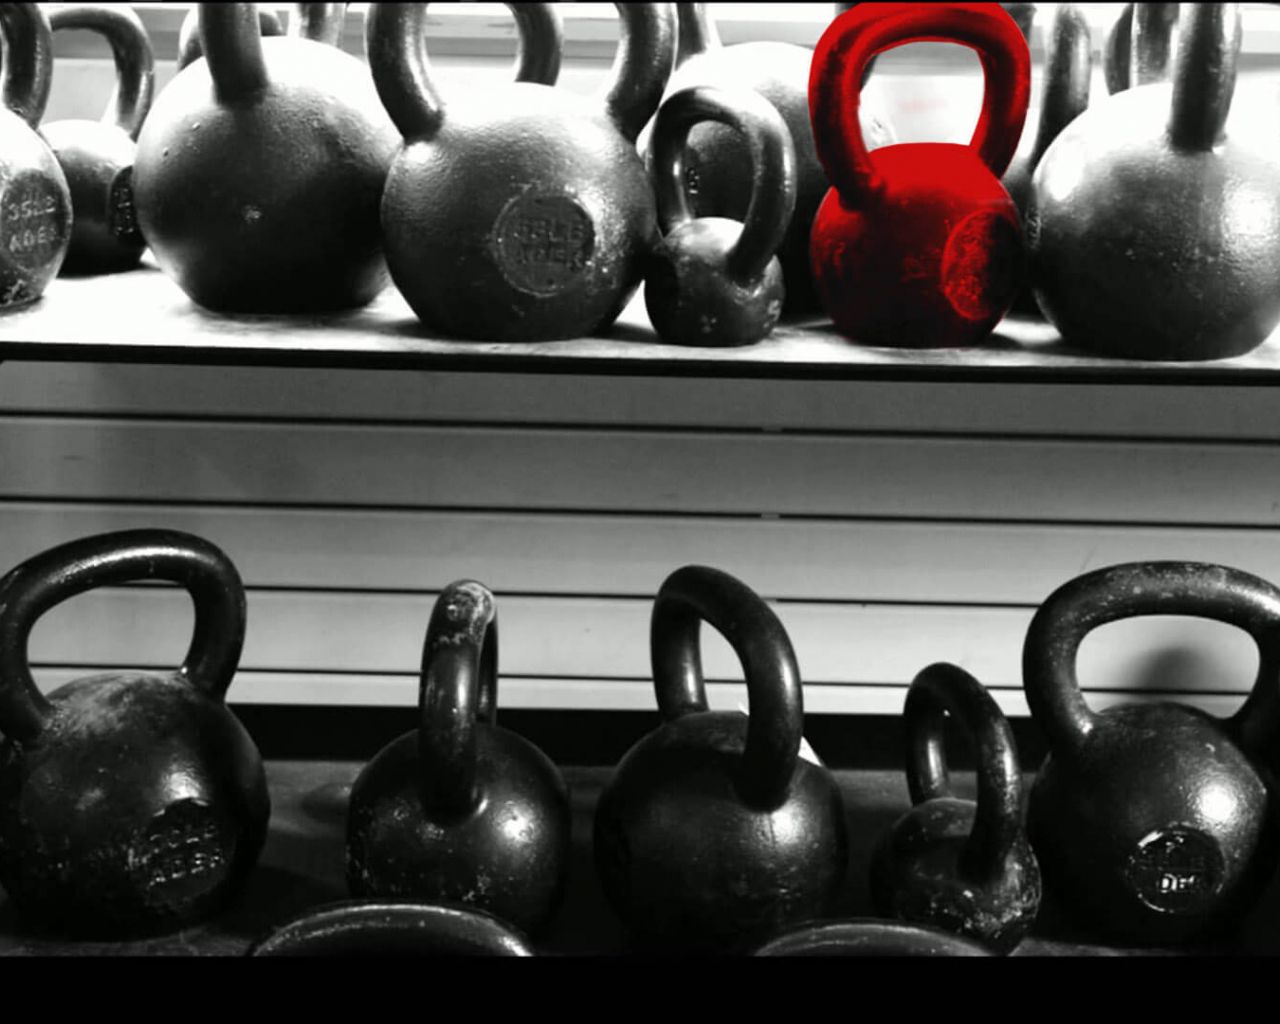 Free download background crossfit beaune kettlebell CrossFit Beaune chez MANA [1920x1080] for your Desktop, Mobile & Tablet. Explore CrossFit Background. CrossFit Background, Crossfit Wallpaper, CrossFit Games 2019 Wallpaper